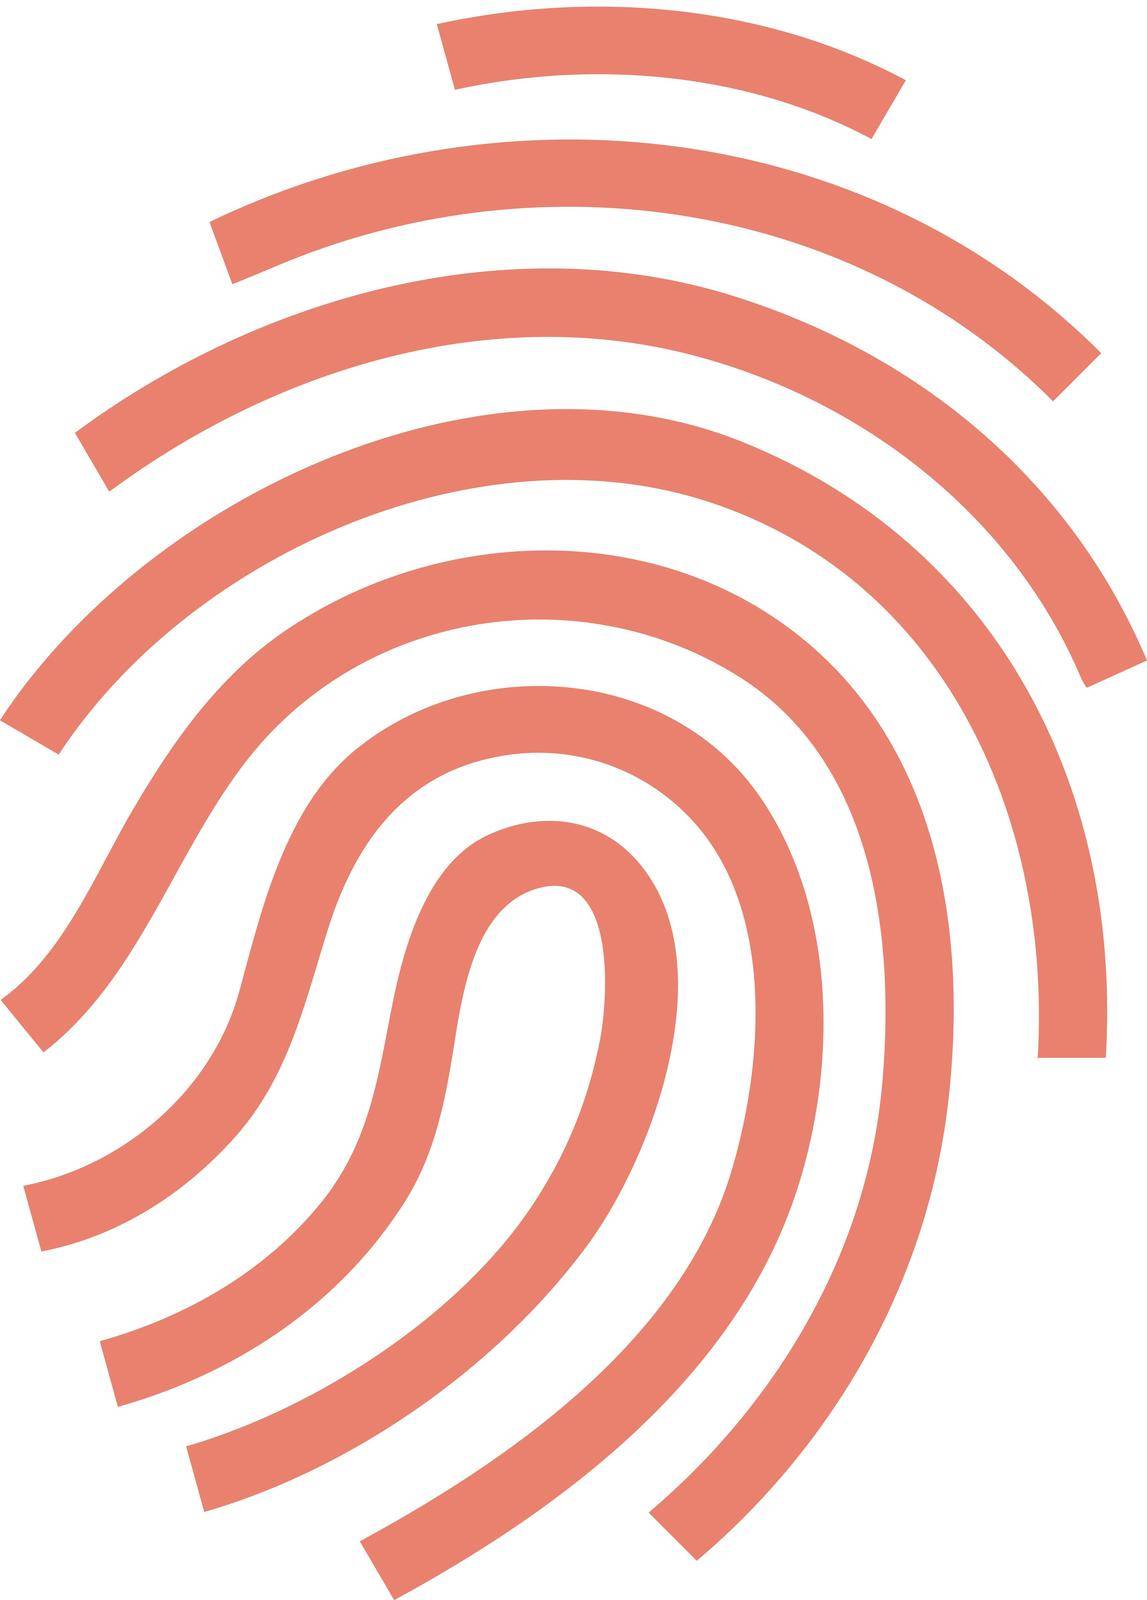 Fingerprint icon in flat color style. Science security crime anatomy identity